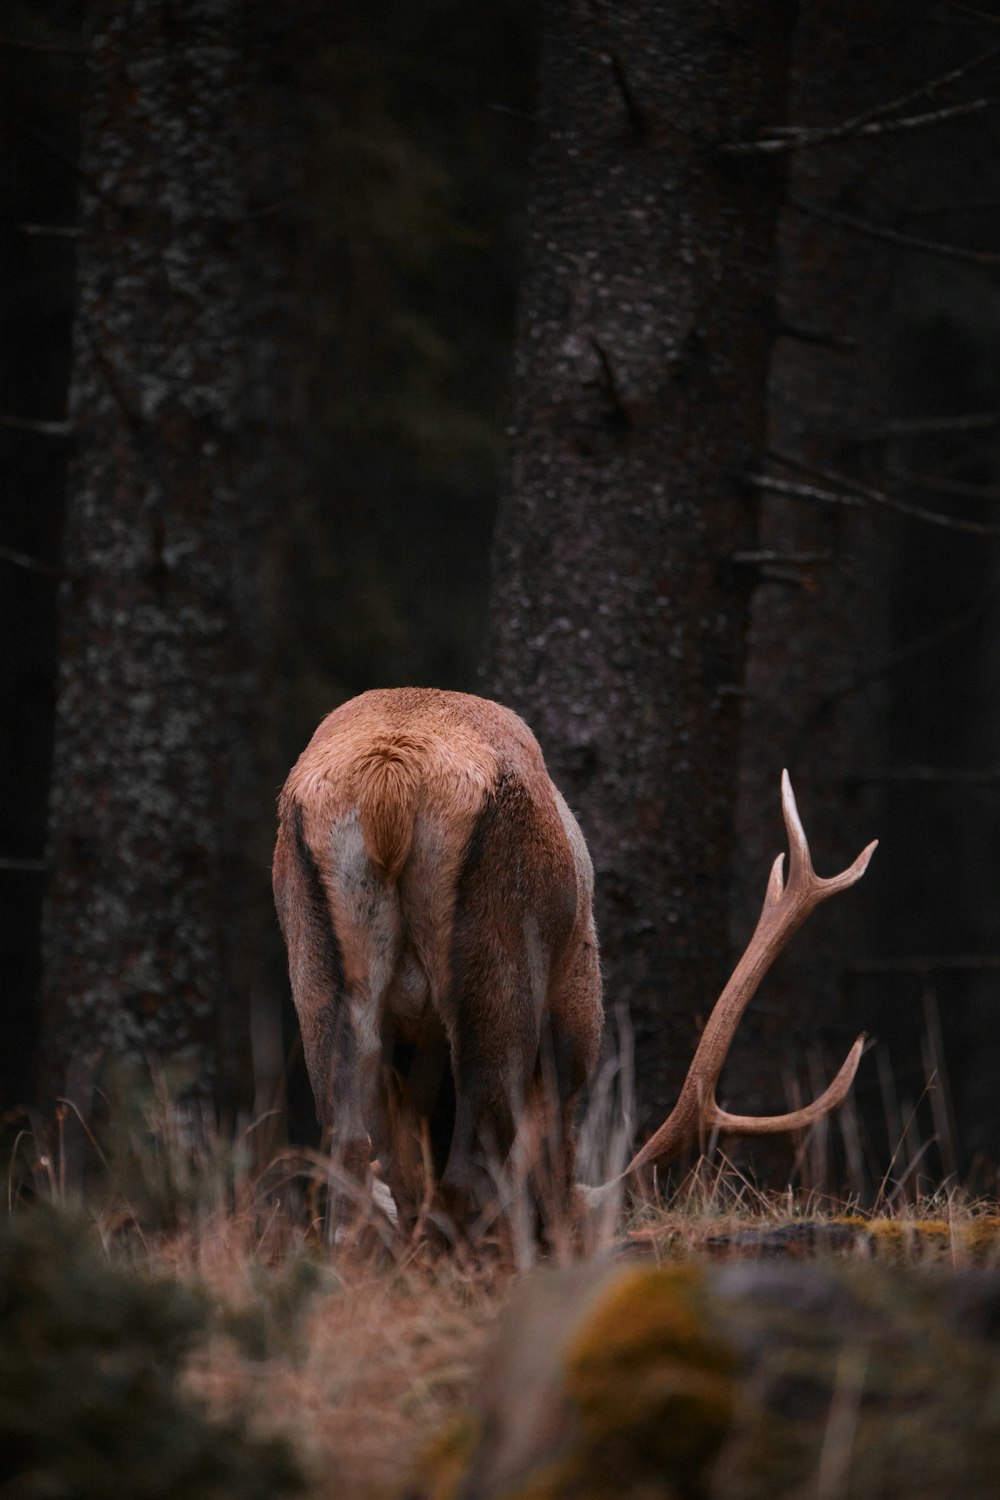 a deer standing in a forest next to some trees